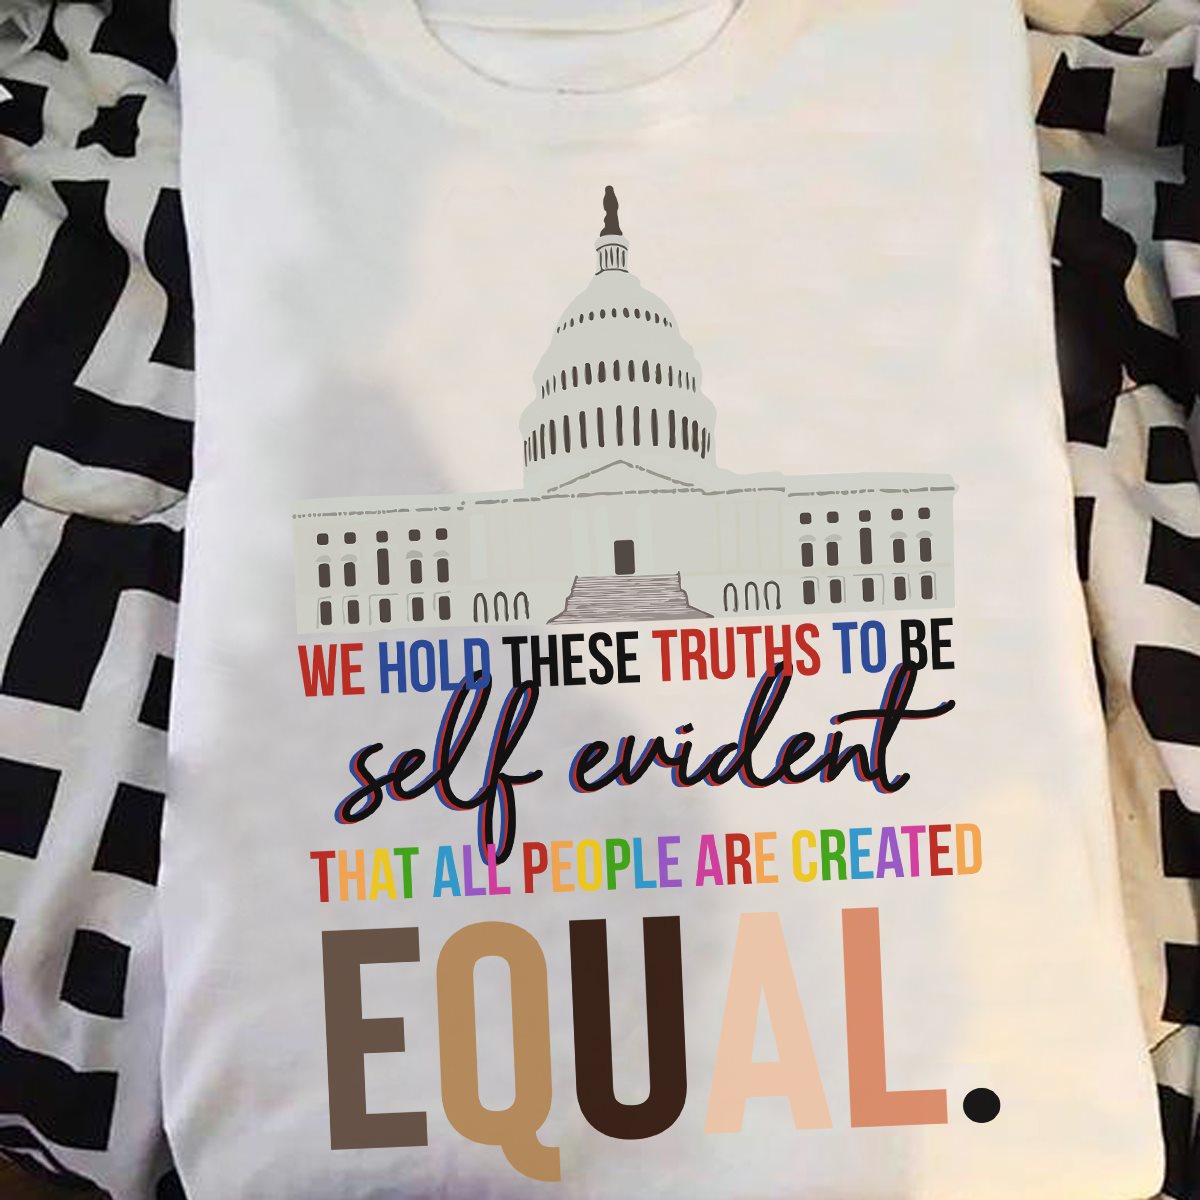 We hold these truths to be self evident that all people are created equal - Lgbt community, black community